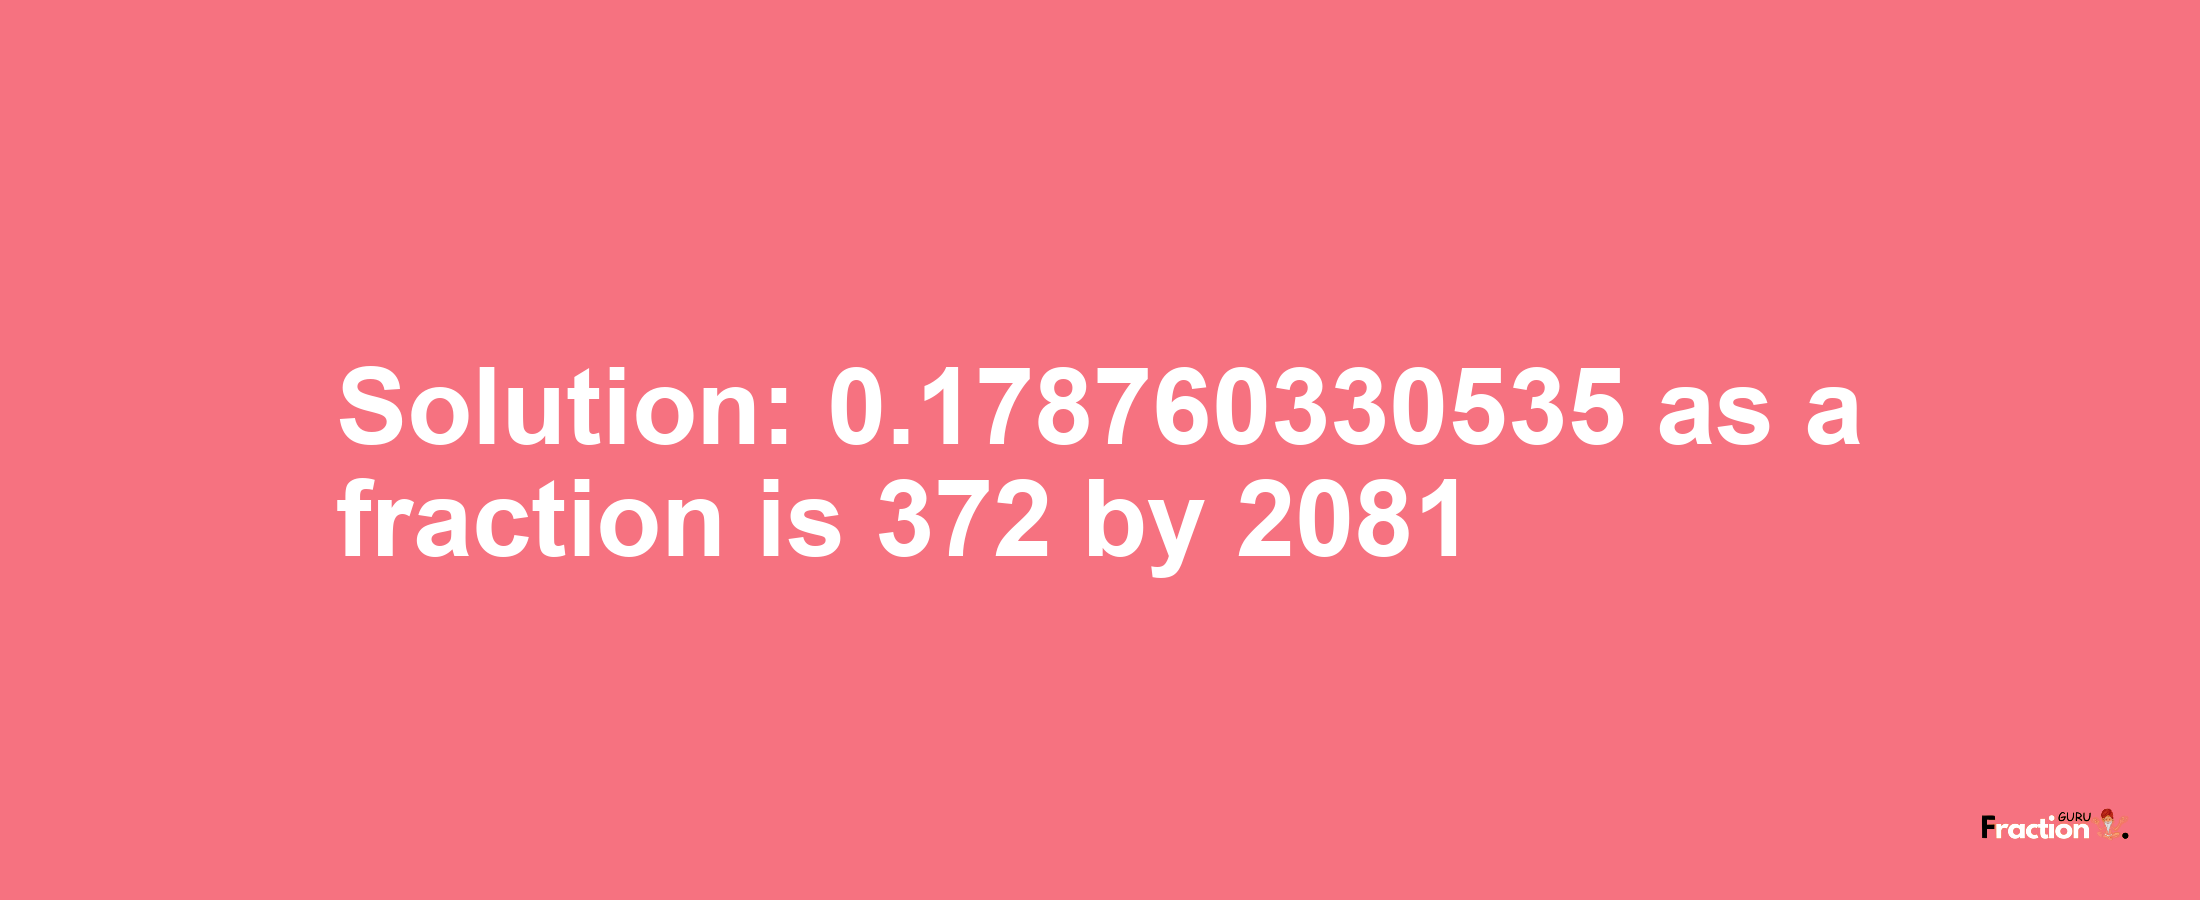 Solution:0.178760330535 as a fraction is 372/2081